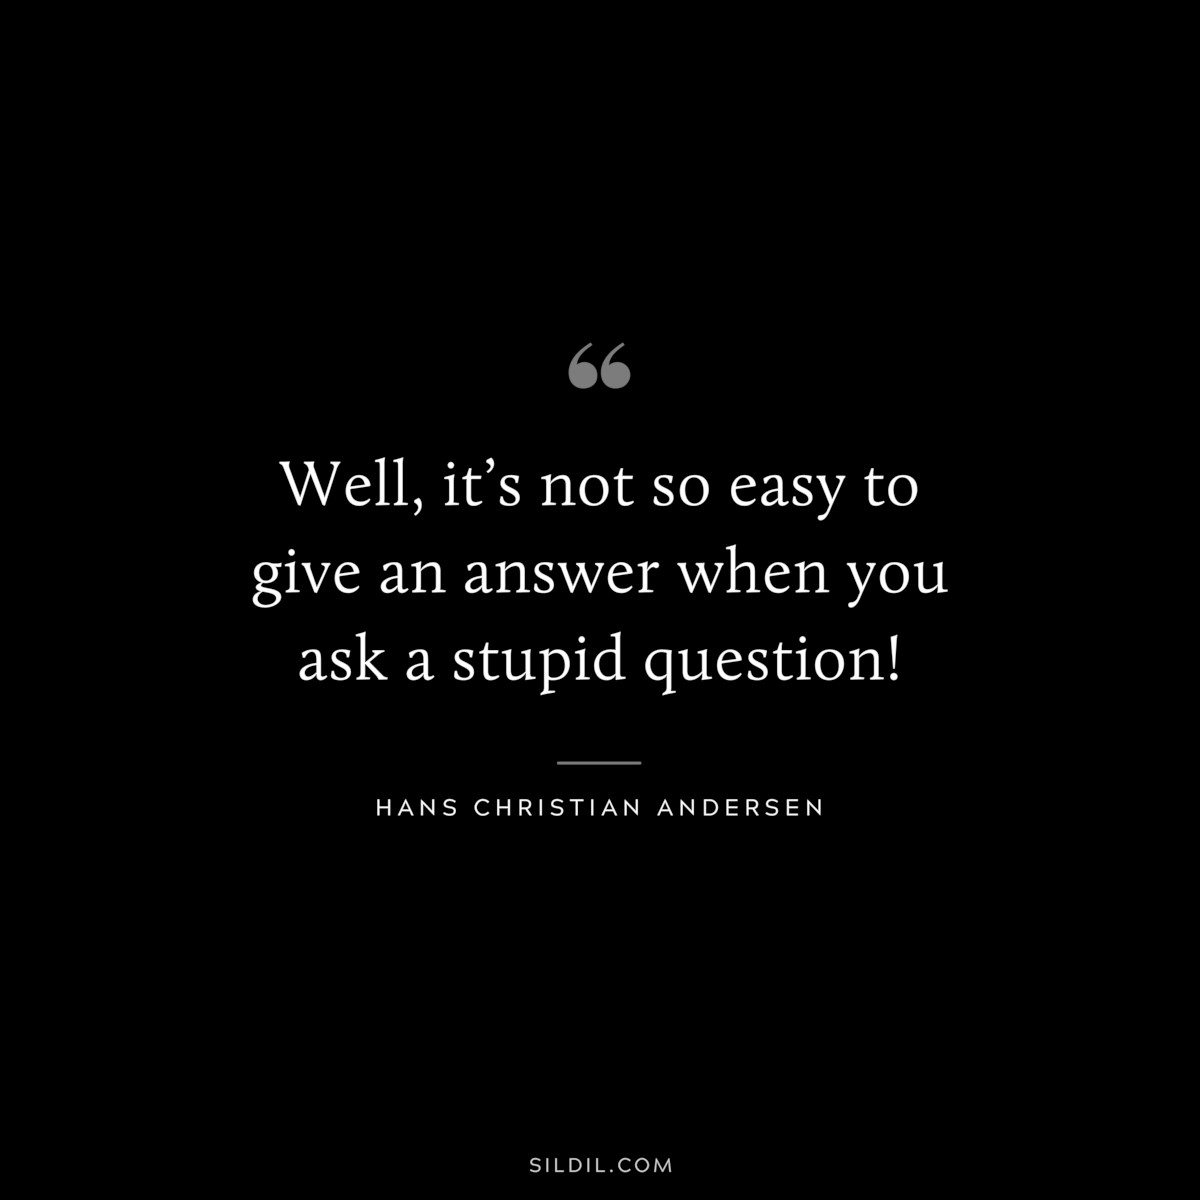 Well, it’s not so easy to give an answer when you ask a stupid question! ― Hans Christian Andersen